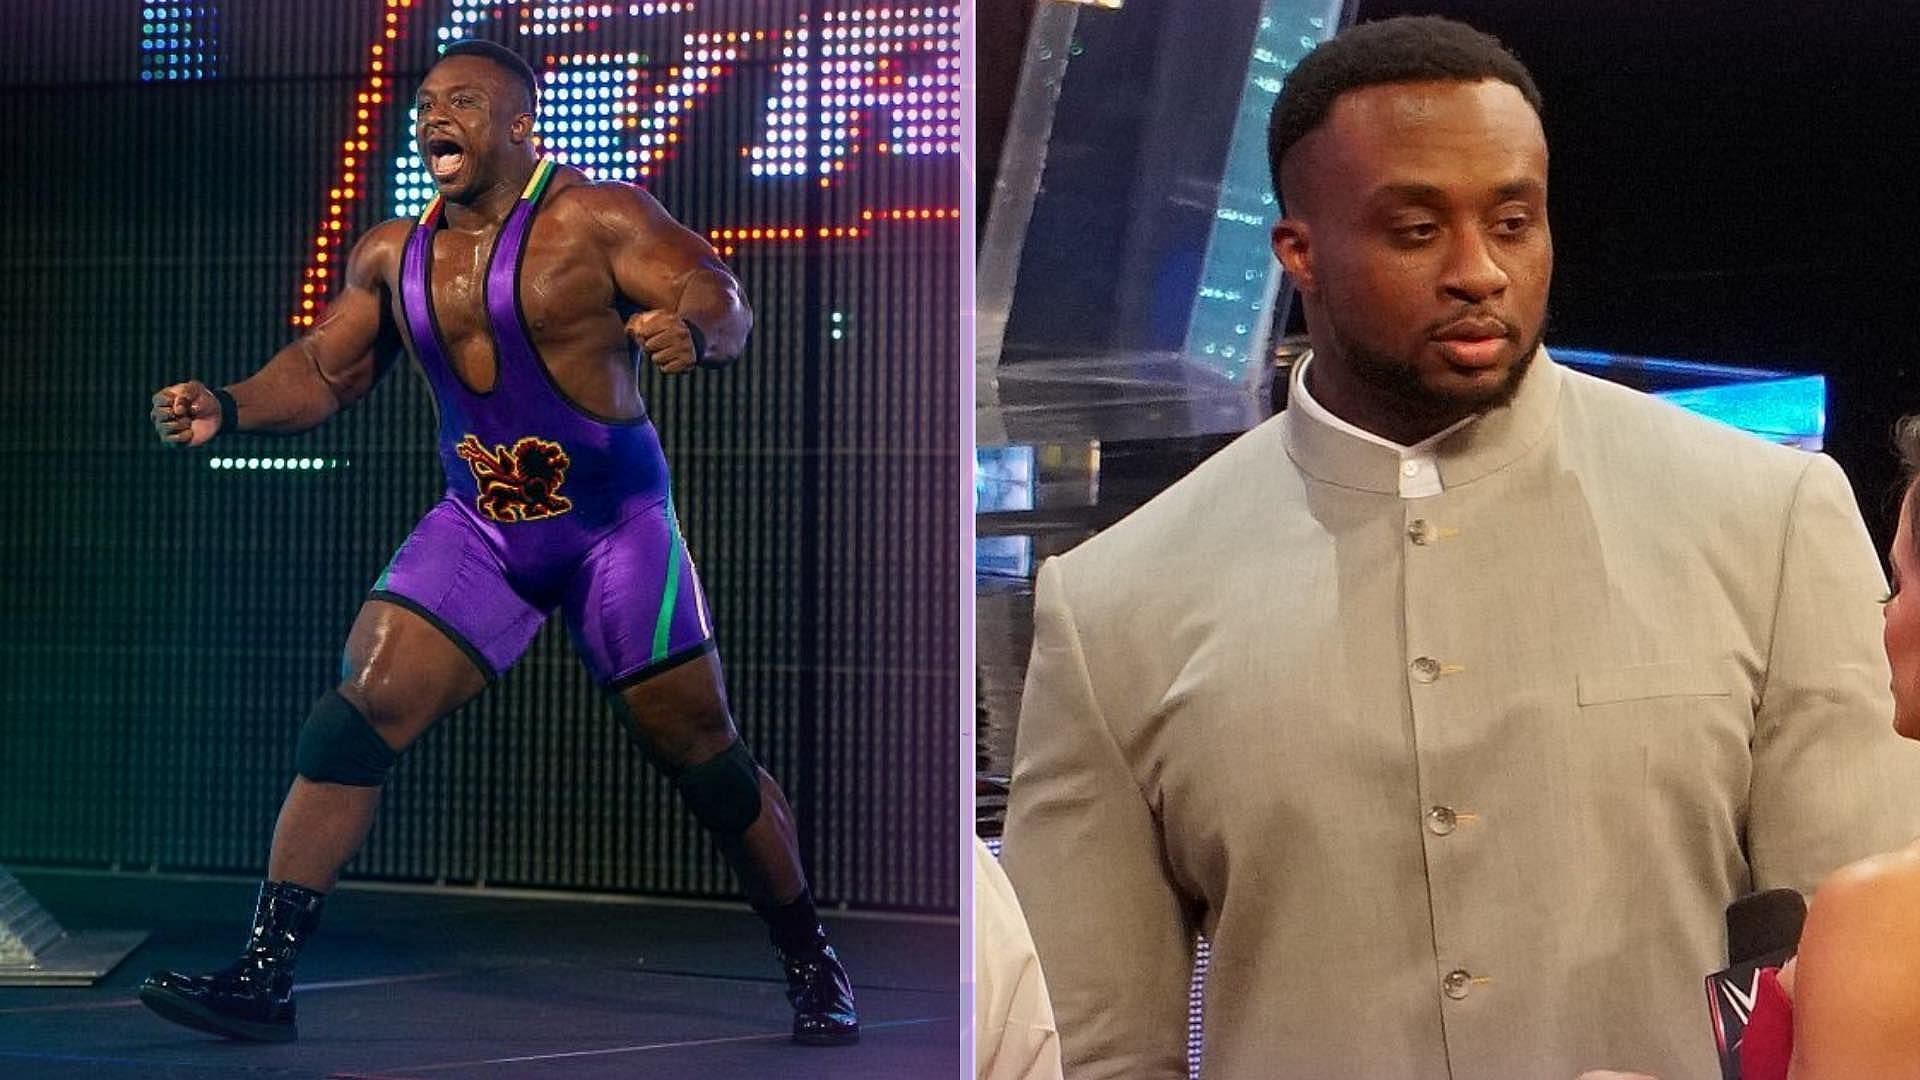  Big E recently made a public appearance